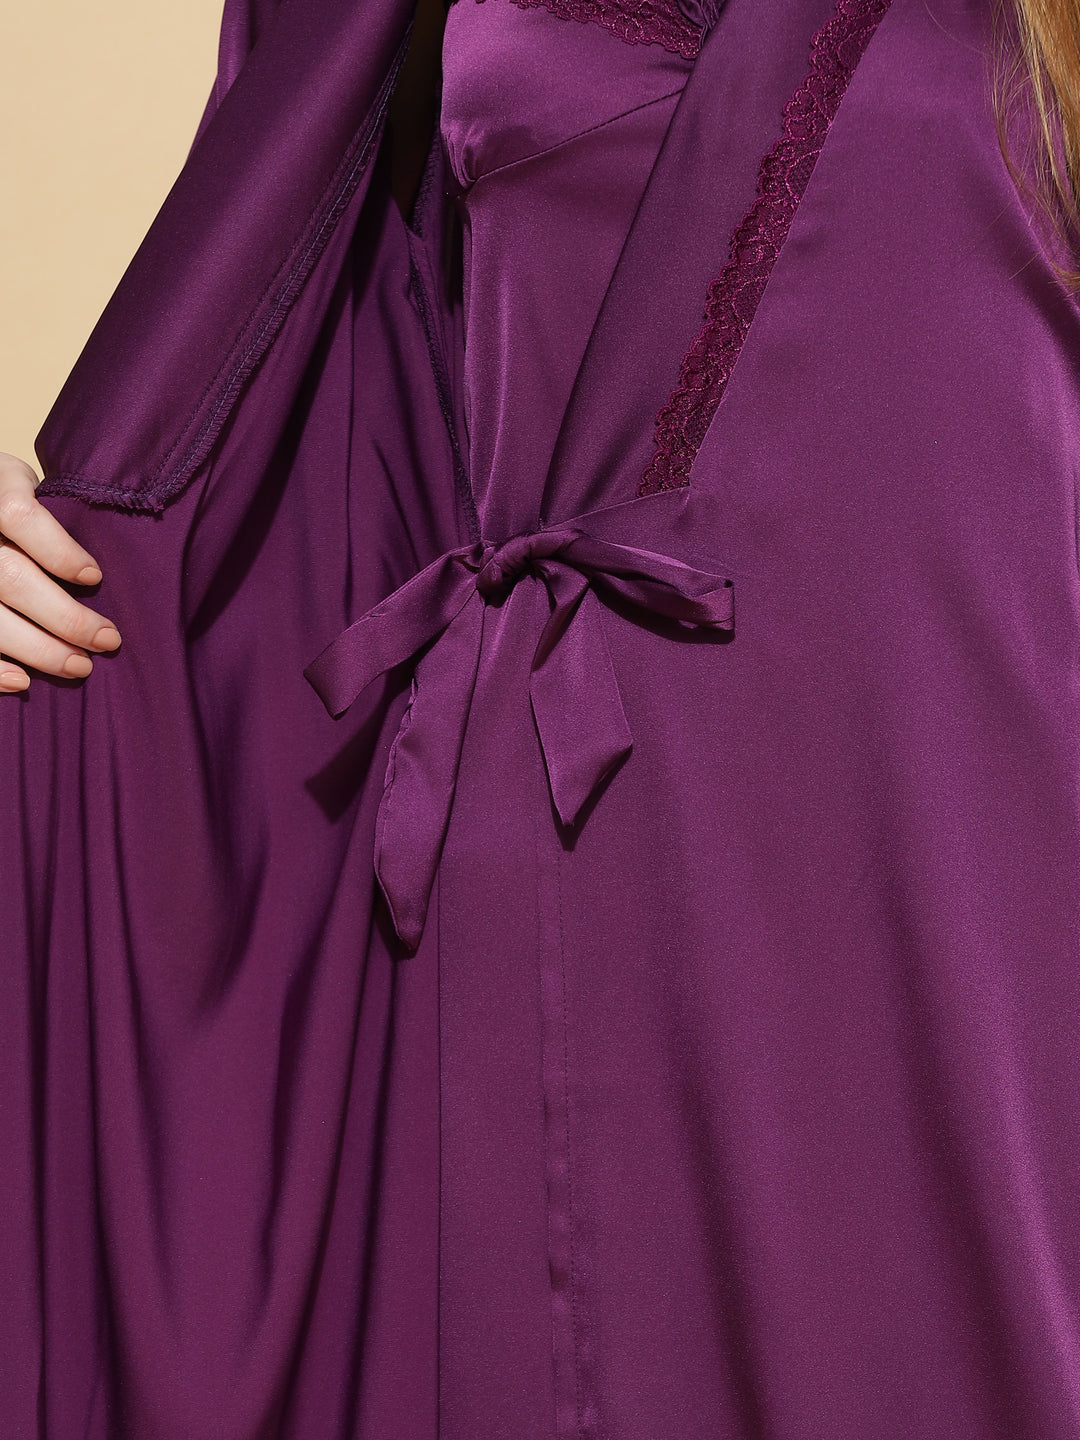  Long Robe Long Gown  Dreams Unveiled: Lavender Romance in Long Robes and Gowns- 9shines label 